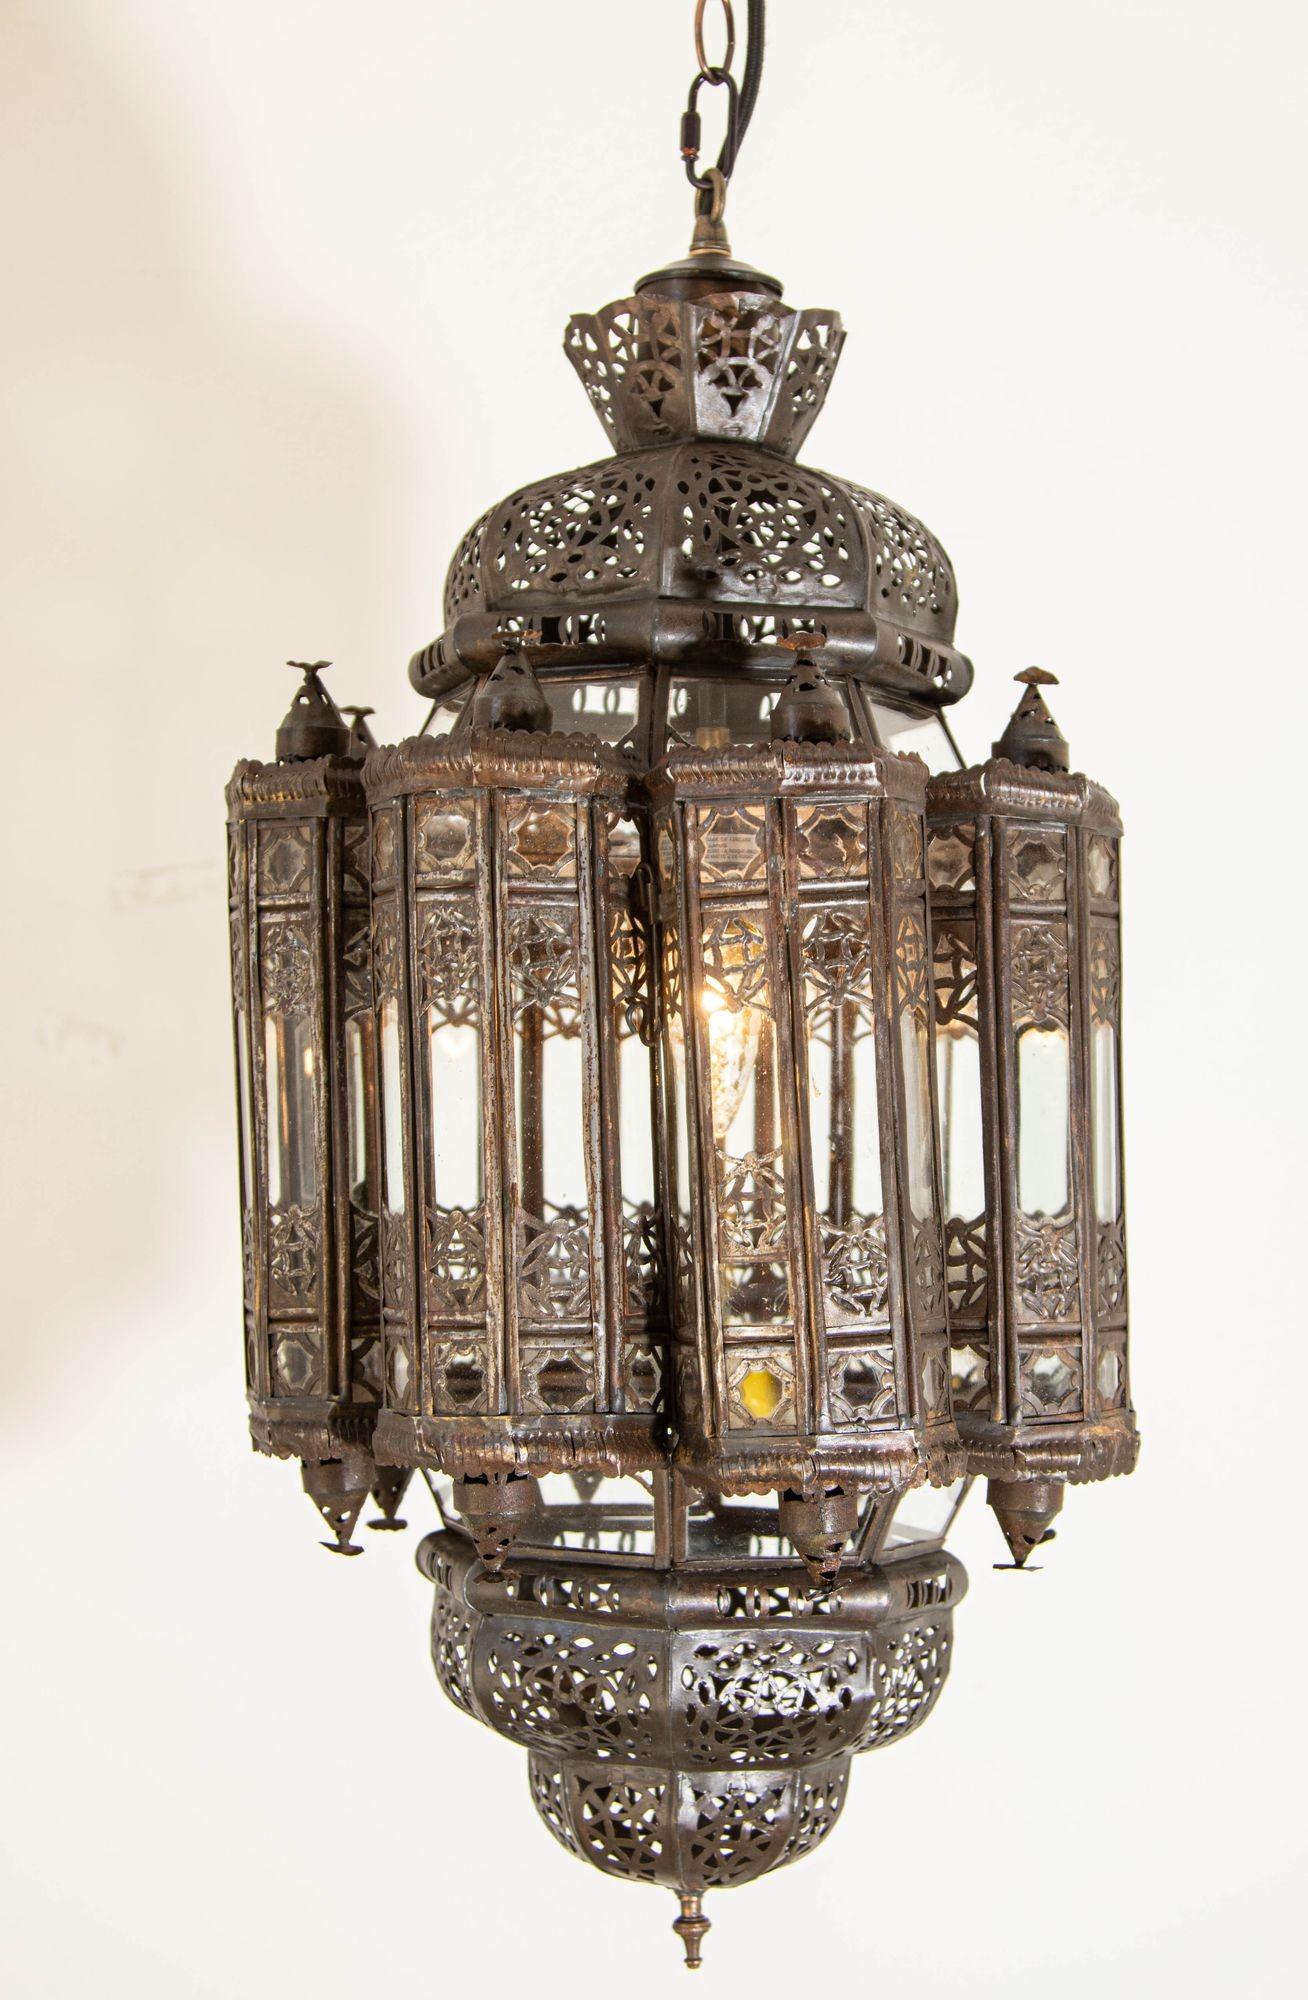 Vintage Moroccan Lantern Mamounia Clear Glass Hand-Crafted Ceiling Light Fixture
Moroccan handcrafted Mamounia pendant lantern handmade in Marrakech, Moorish filigree metal hand-cut in Moorish designs, clear glass.
Condition: As seen on the picture